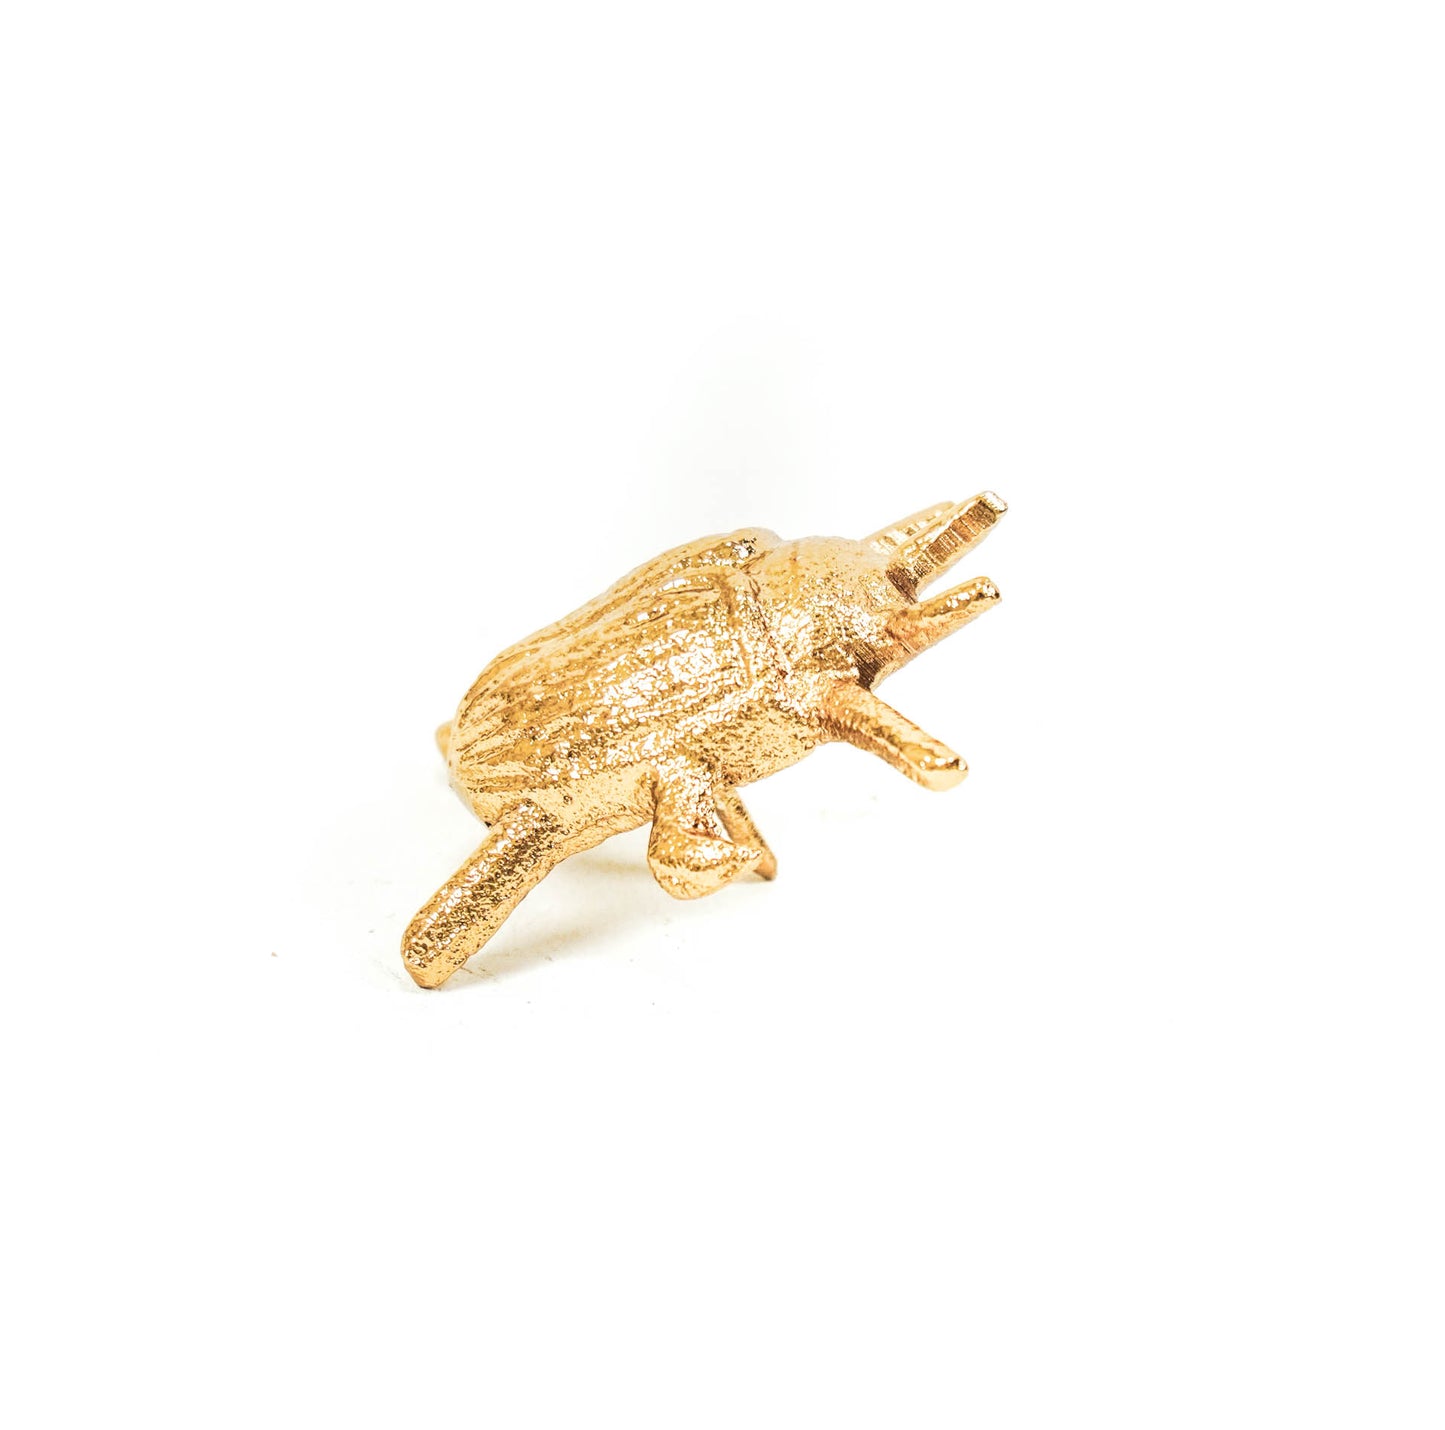 Housevitamin Bug Candle Pins - Gold - Set of 2 - 6x5x2cm